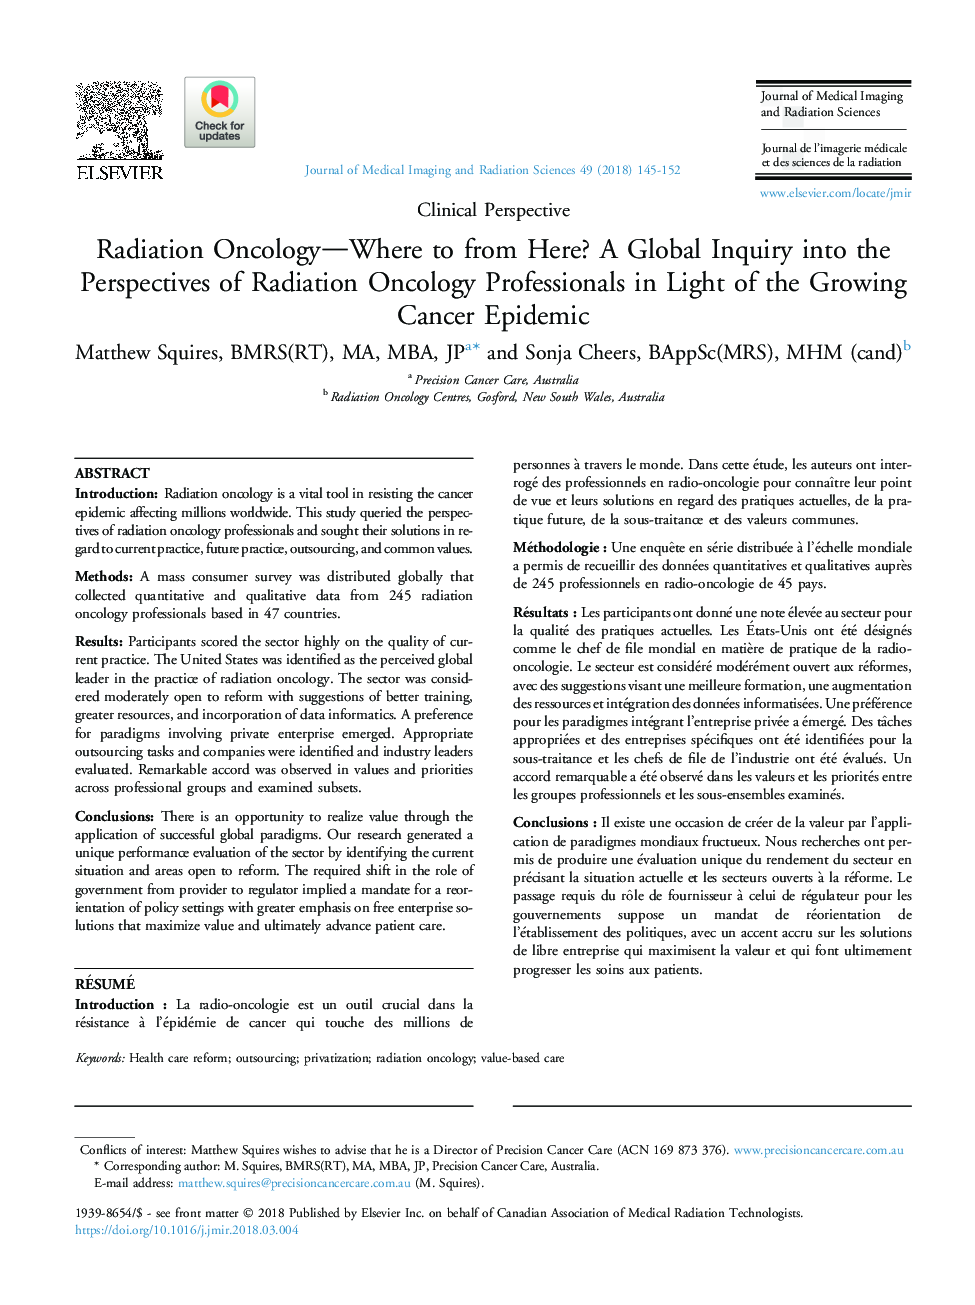 Radiation Oncology-Where to from Here? A Global Inquiry into the Perspectives of Radiation Oncology Professionals in Light of the Growing Cancer Epidemic